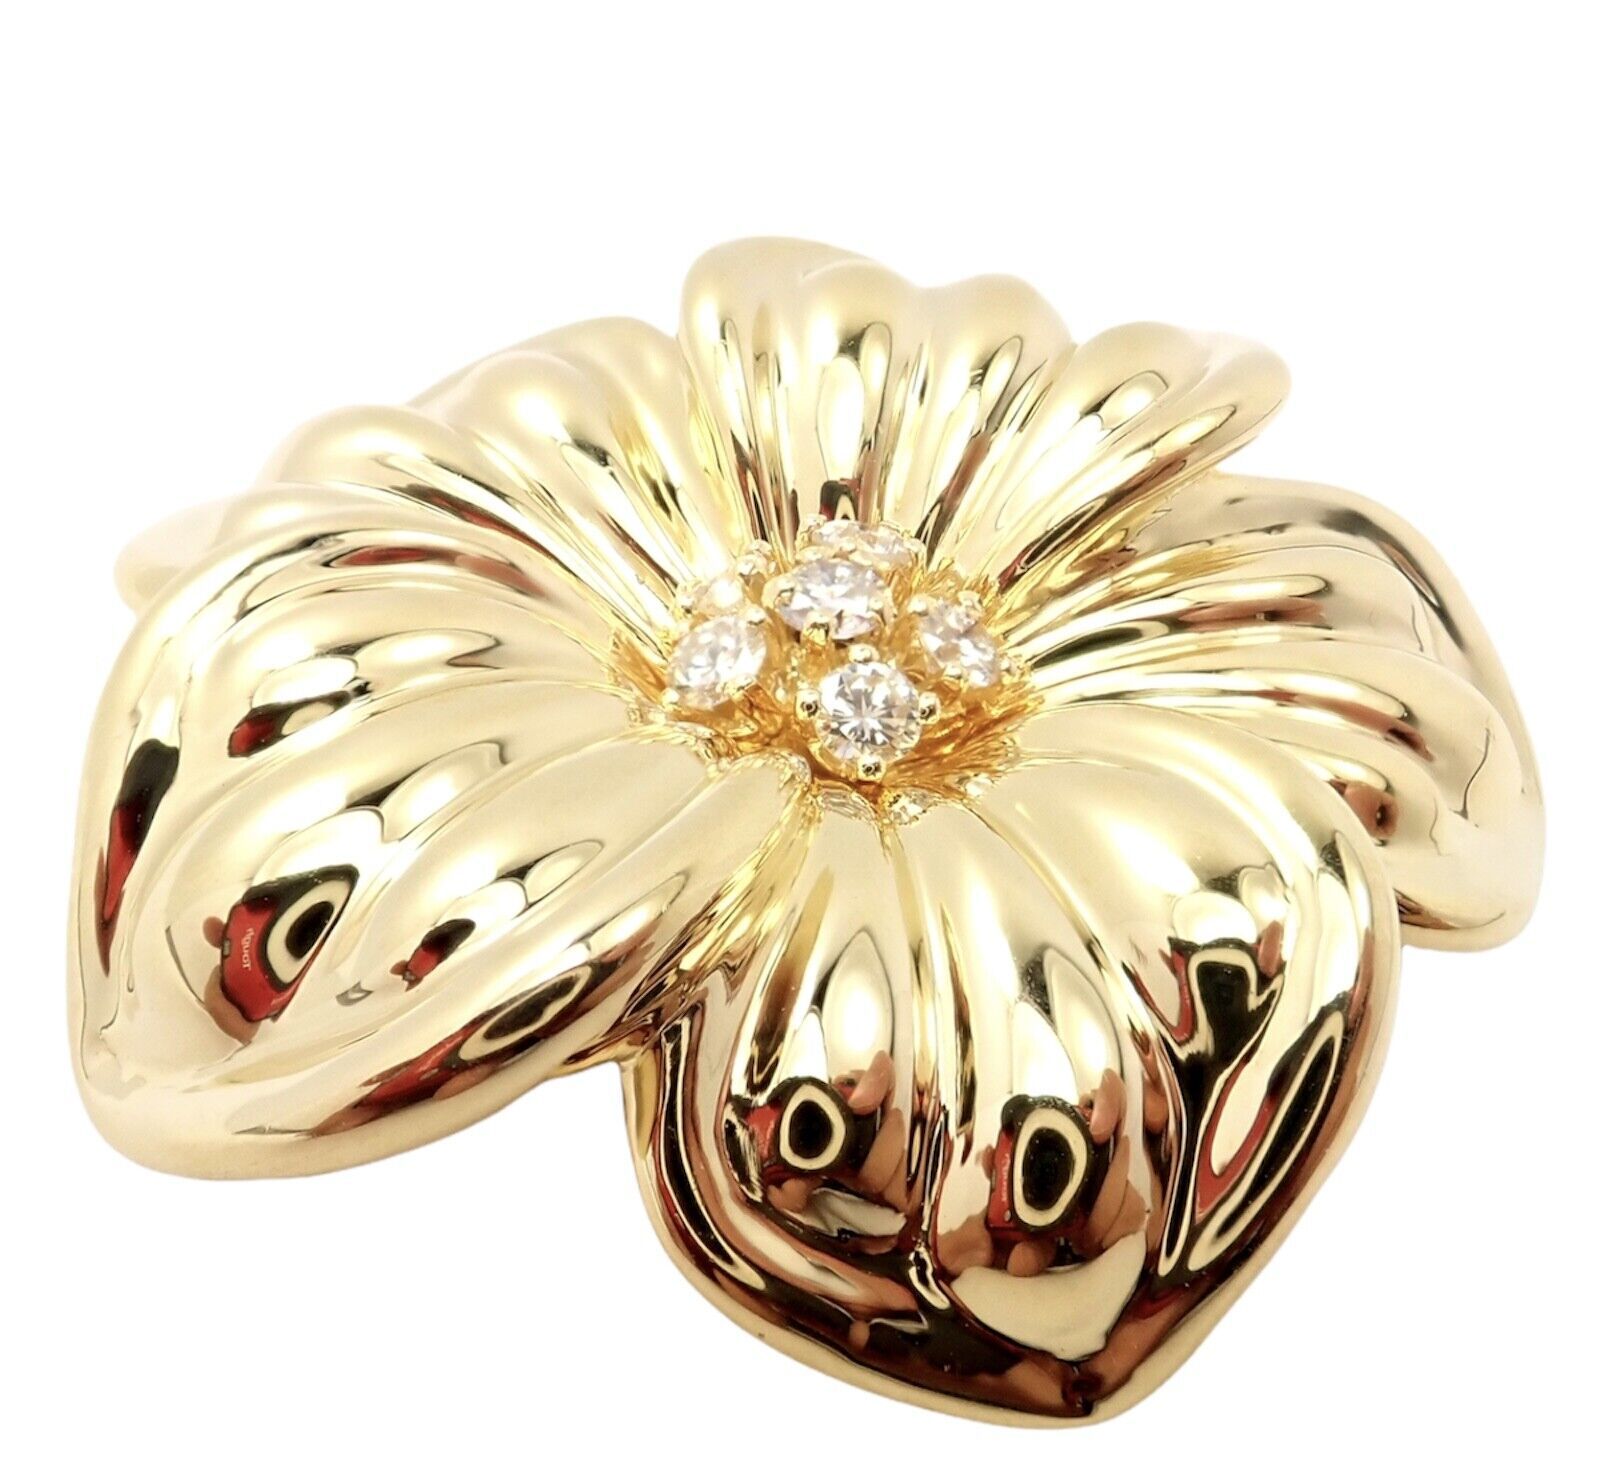 Van Cleef & Arpels Diamond 18k Yellow Gold Magnolia Flower Pin Brooch Size ONE SIZE - 6 Thumbnail